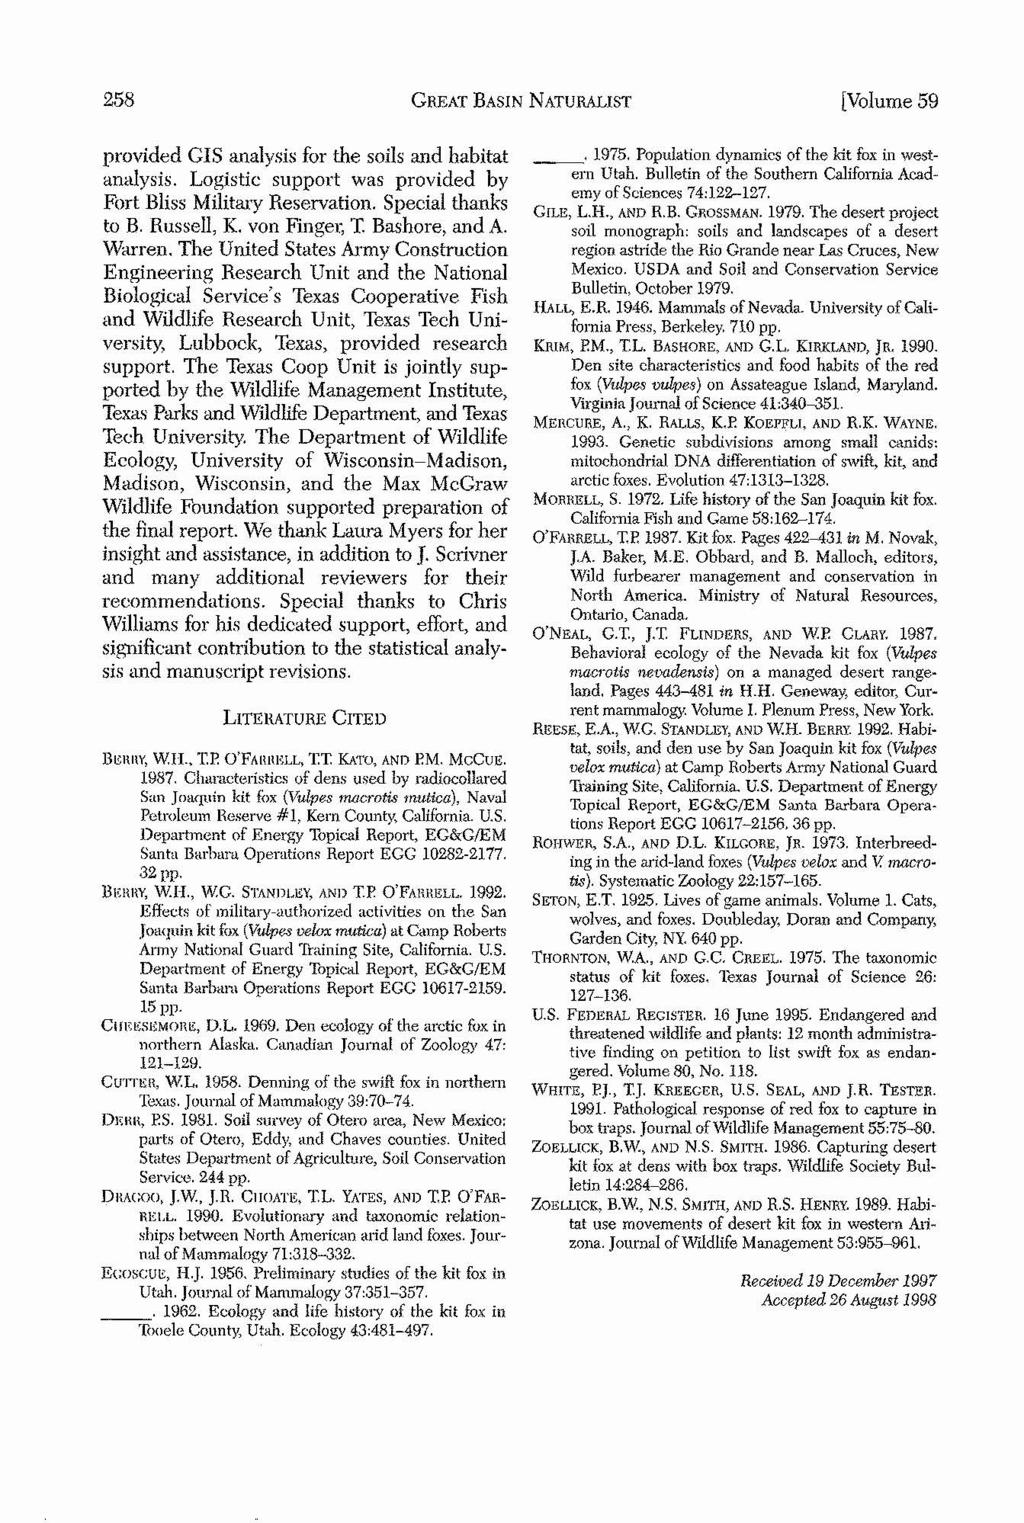 258 GREAT BASN NATURALST [Volume 59 provded GS analyss for the sols and habtat analyss. Logstc support was provded by Fort Blss Mltary Reservaton. Specal thanks to B. Russell K.